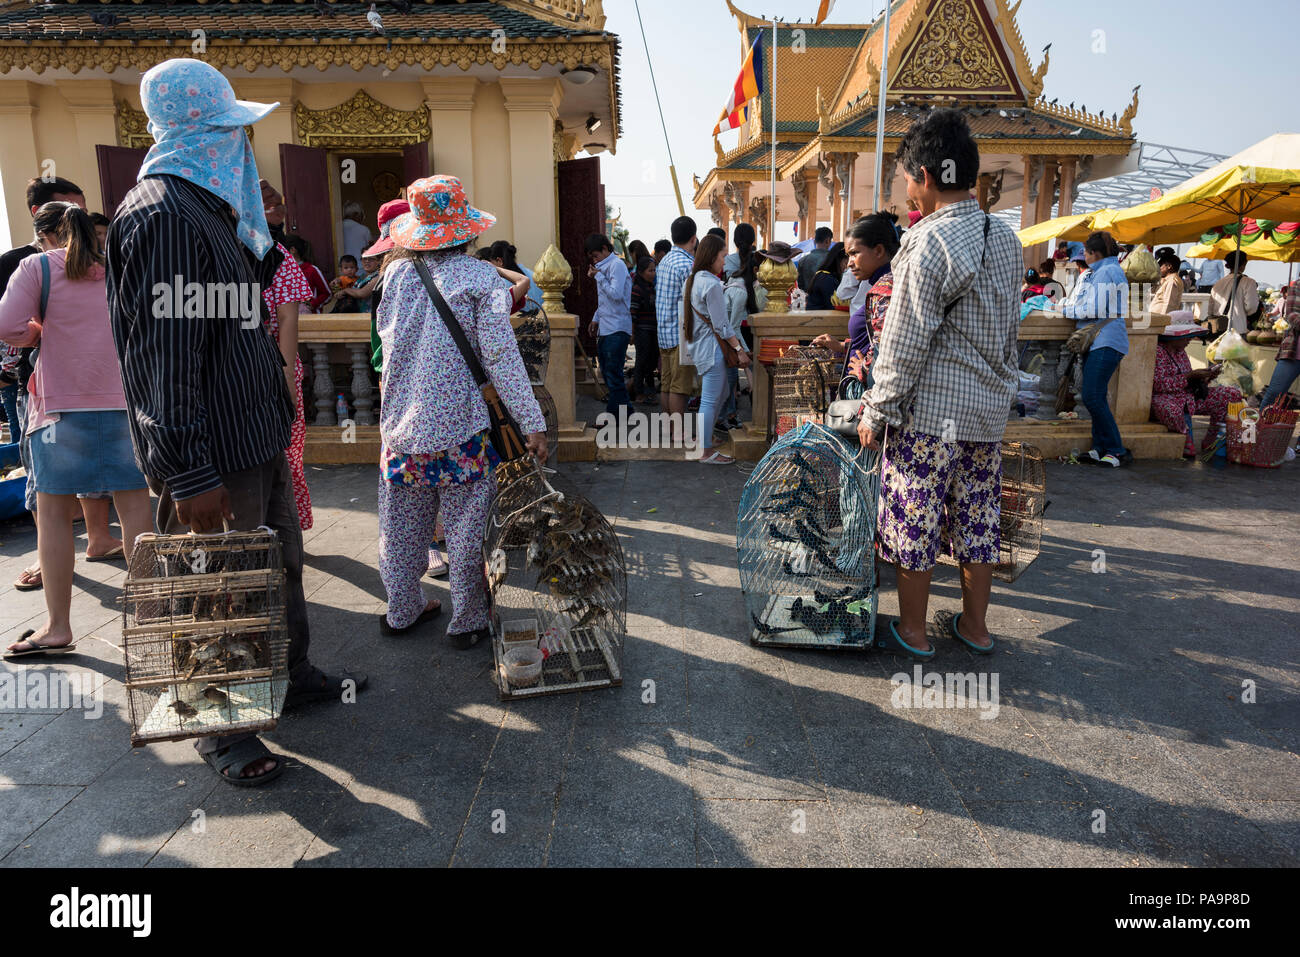 People selling birds to people. They are purchased, released by worshippers after their passage to a temple or a shrine. Phnom Penh, Cambodia Stock Photo